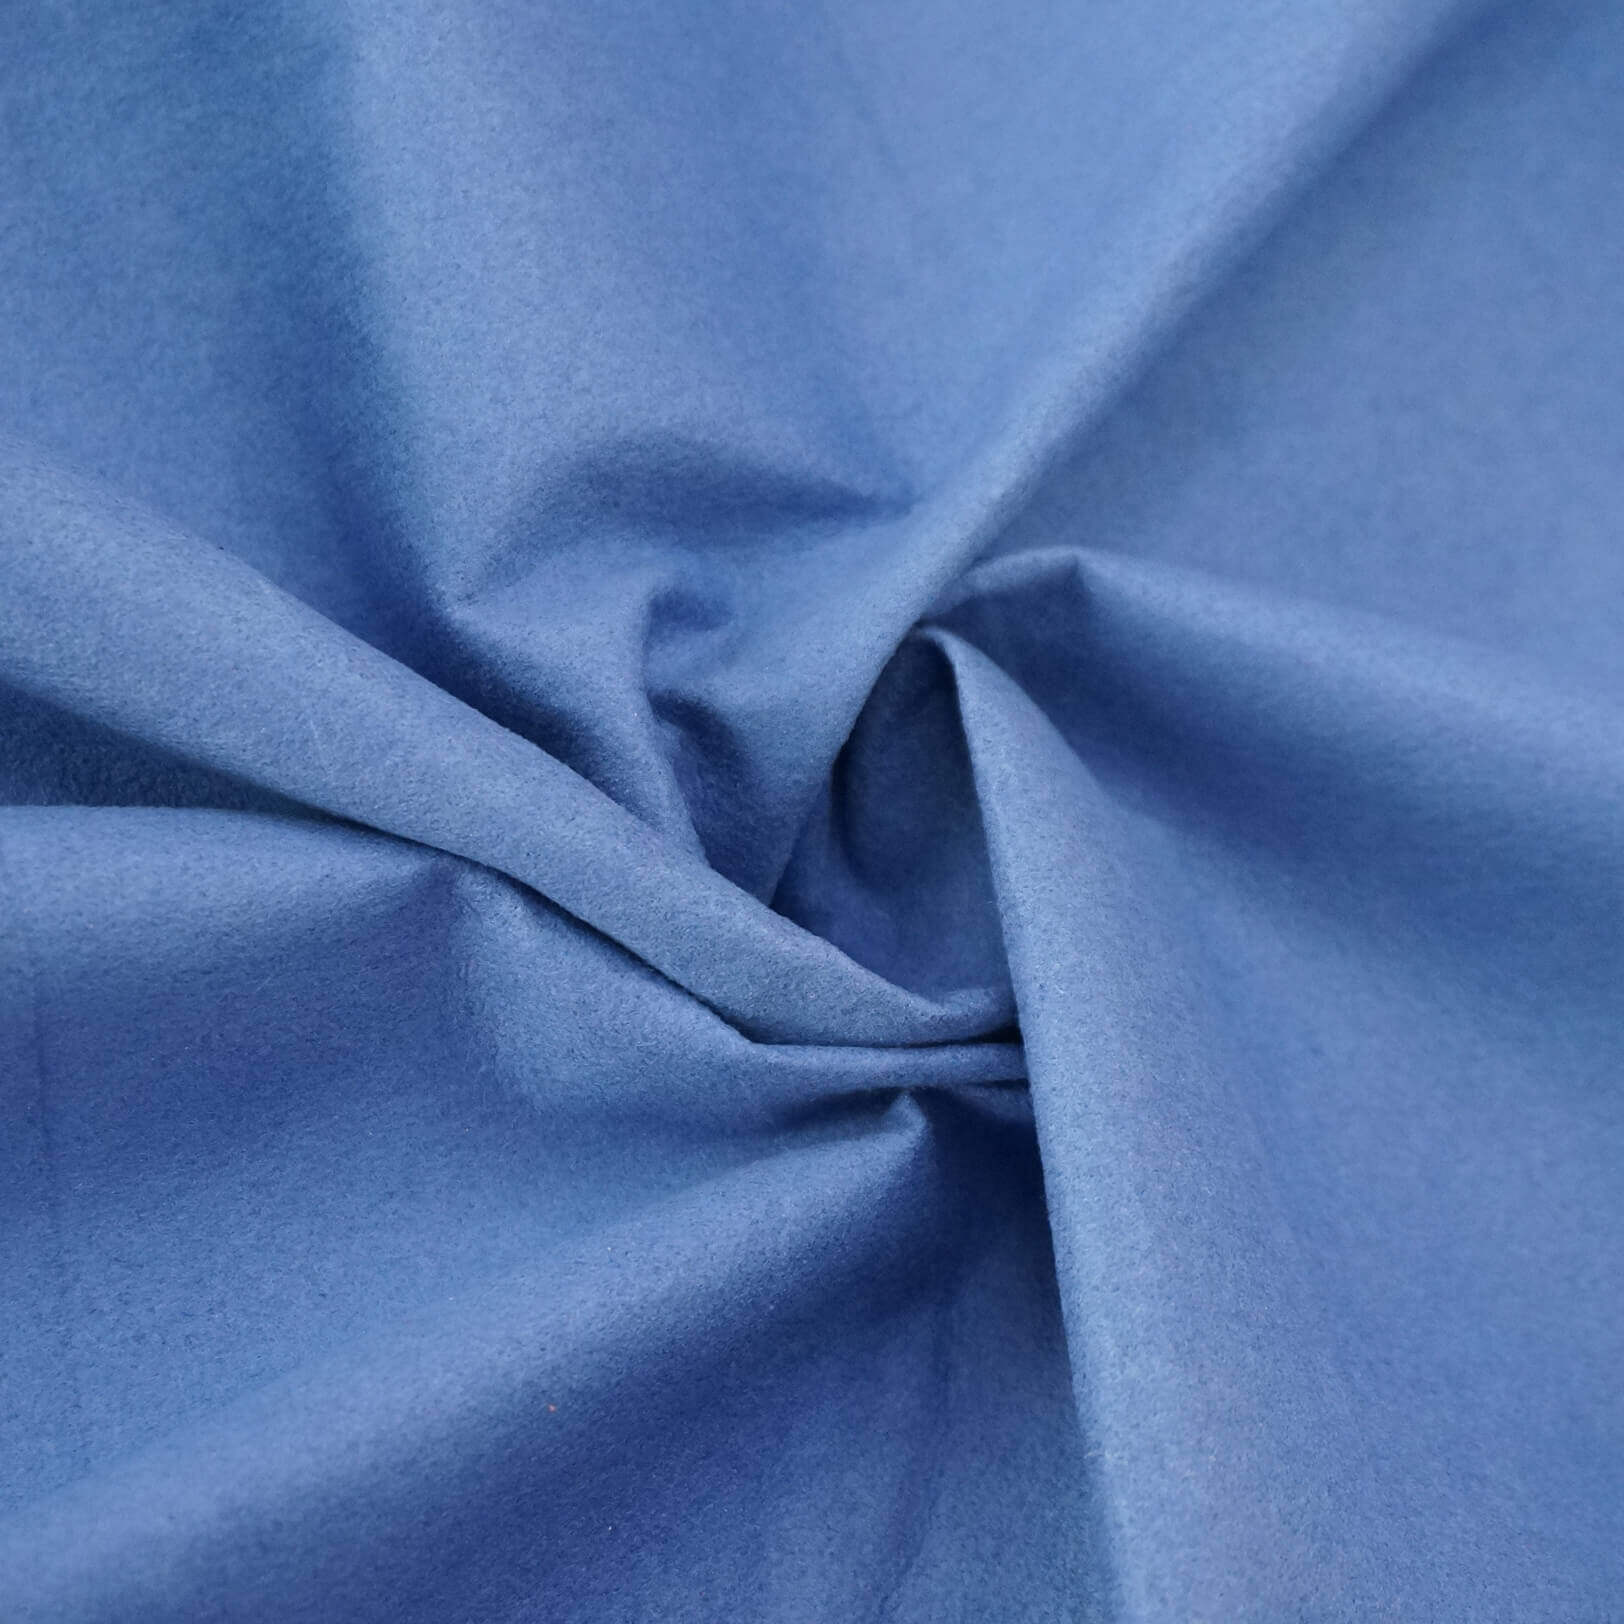 suede leather upholstery fabric, suede leather material for sale